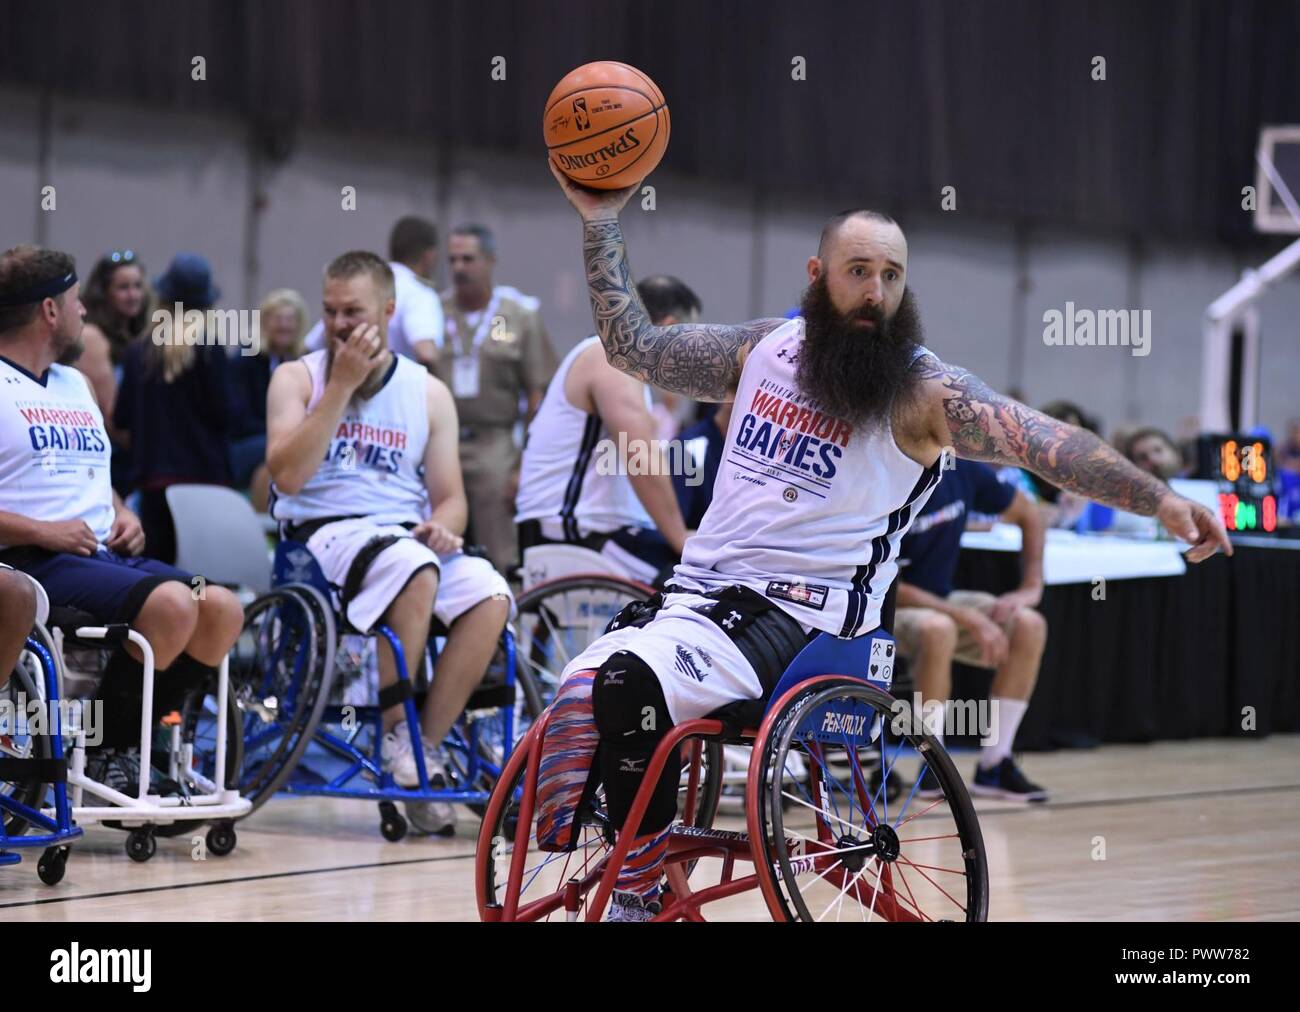 CHICAGO (June 30, 2017) Retired Aviation Electrician's Mate Airman Steve Davis, a native of Modesto, Calif., participates in the wheelchair basketball portion for Team Navy during the 2017 Warrior Games at McCormick Place in Chicago. Team Navy is comprised of athletes from Navy Wounded Warrior - Safe Harbor, the Navy's sole organization for coordinating the non-medical care of seriously wounded, ill, and injured Sailors and Coast Guard members, providing resources and support to their families. ( Stock Photo